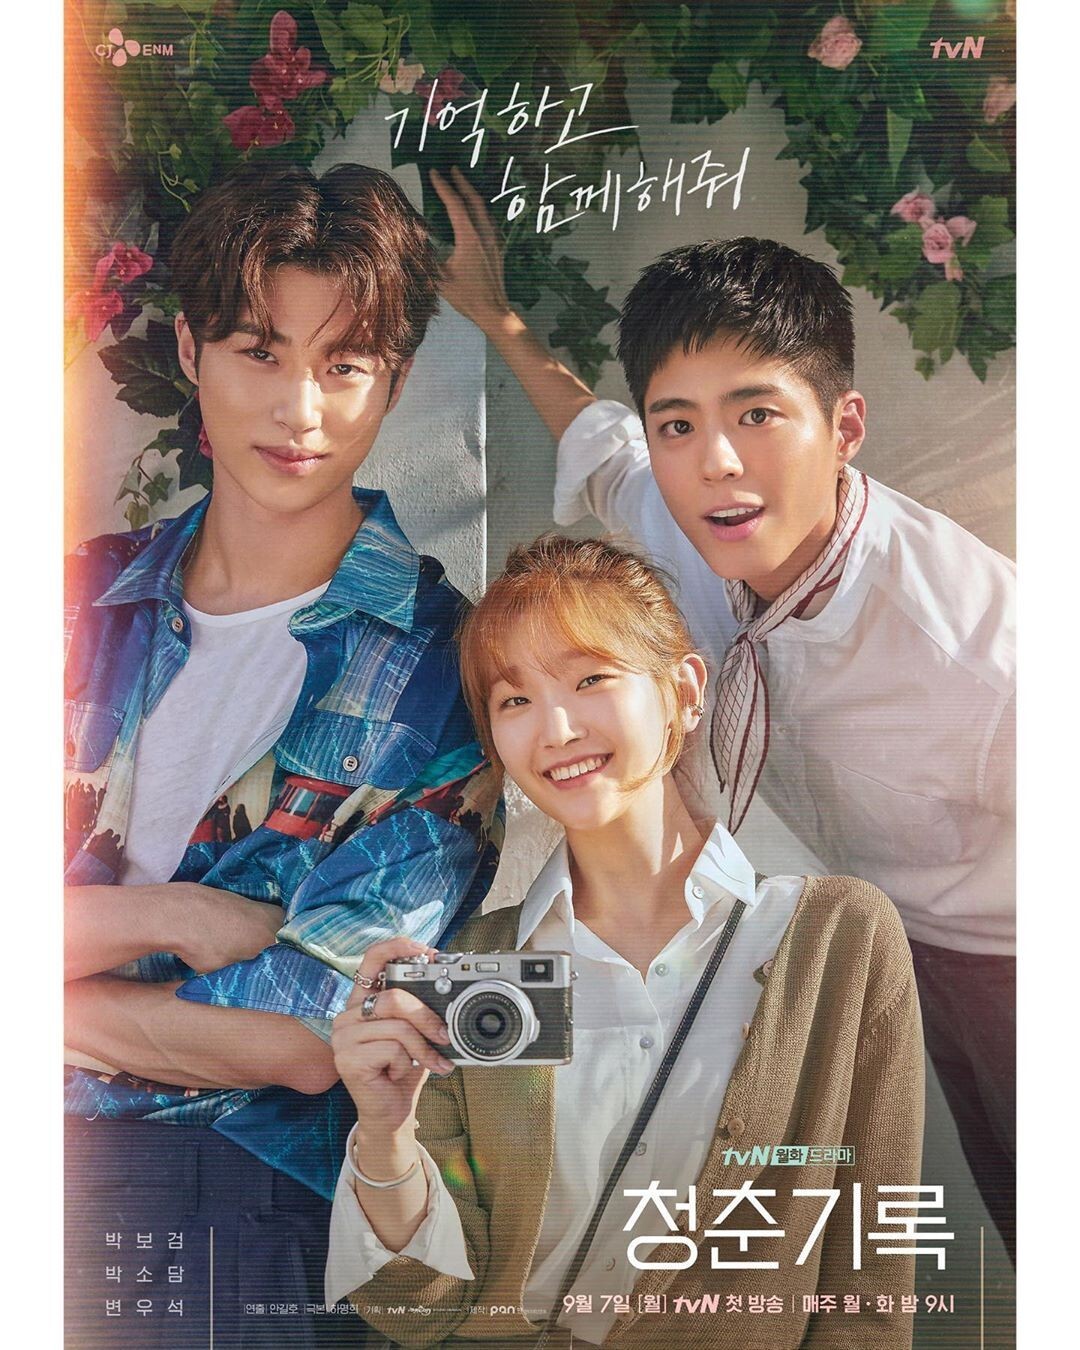 Netflix S New K Drama Record Of Youth Starring Park Bo Gum And Parasite S Park So Dam Promises Young Beautiful Stars Seeking Fame In Fashion And Entertainment But What Else South China Morning Post